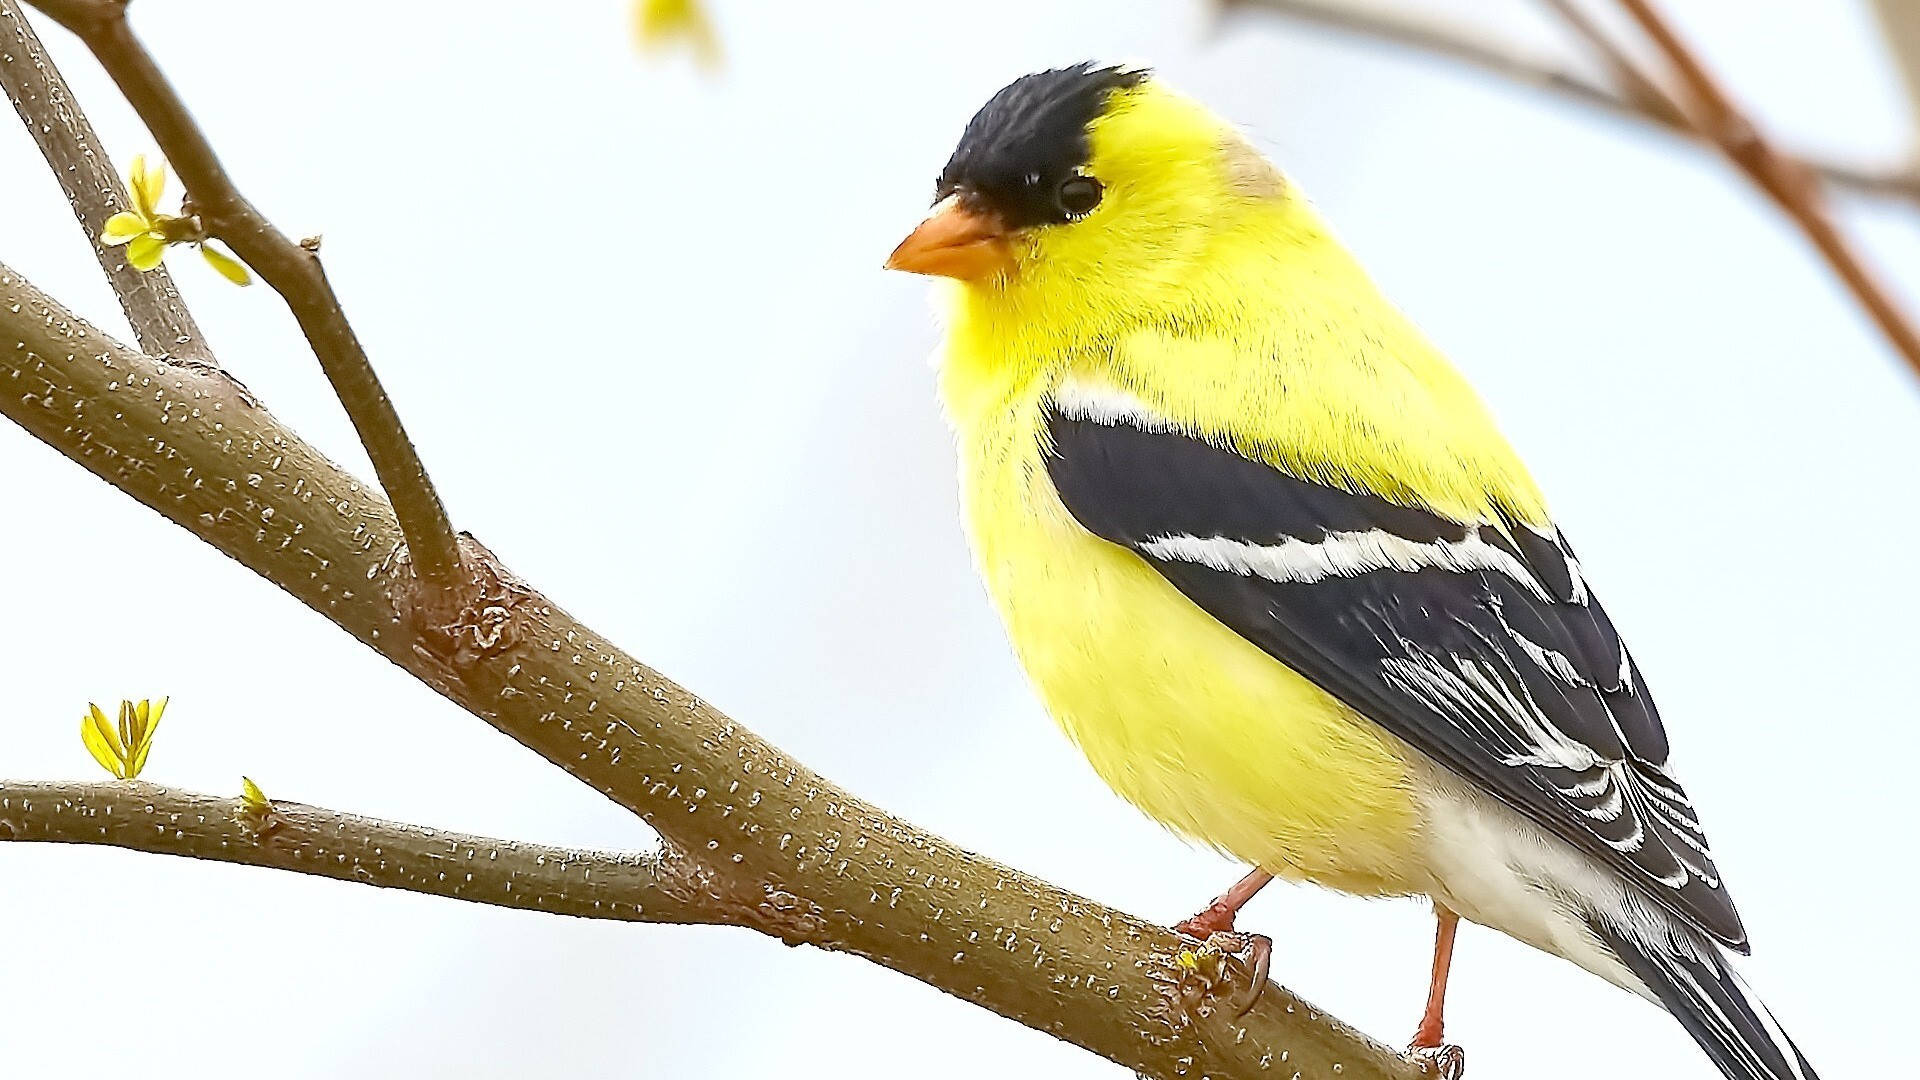 Yellow Bird With Black Feathers Wallpaper